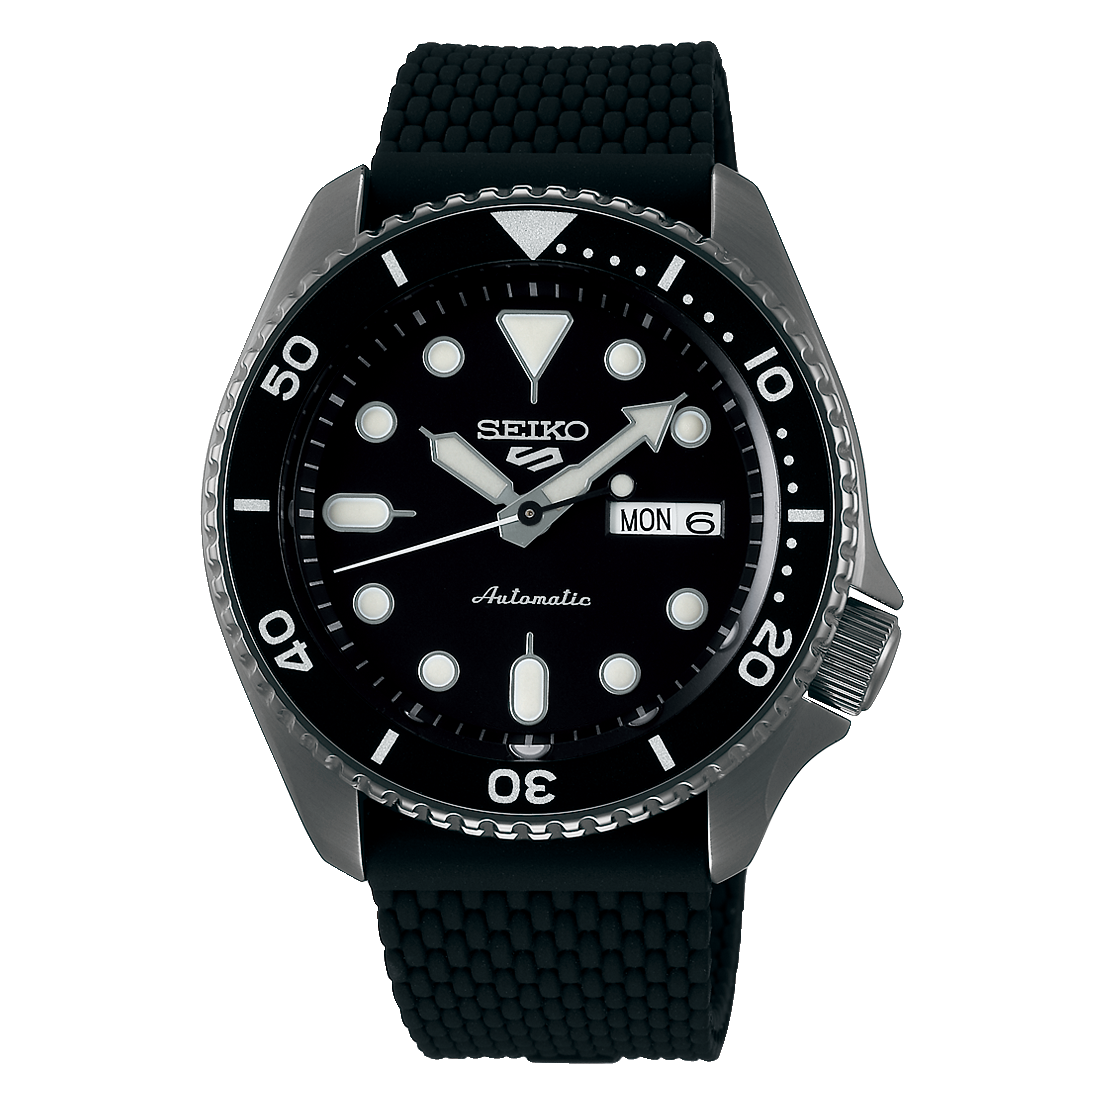 Seiko 5 Sports Automatic Black Silicon Strap Watch SRPD65K2 (LOCAL BUYERS ONLY) Watchspree